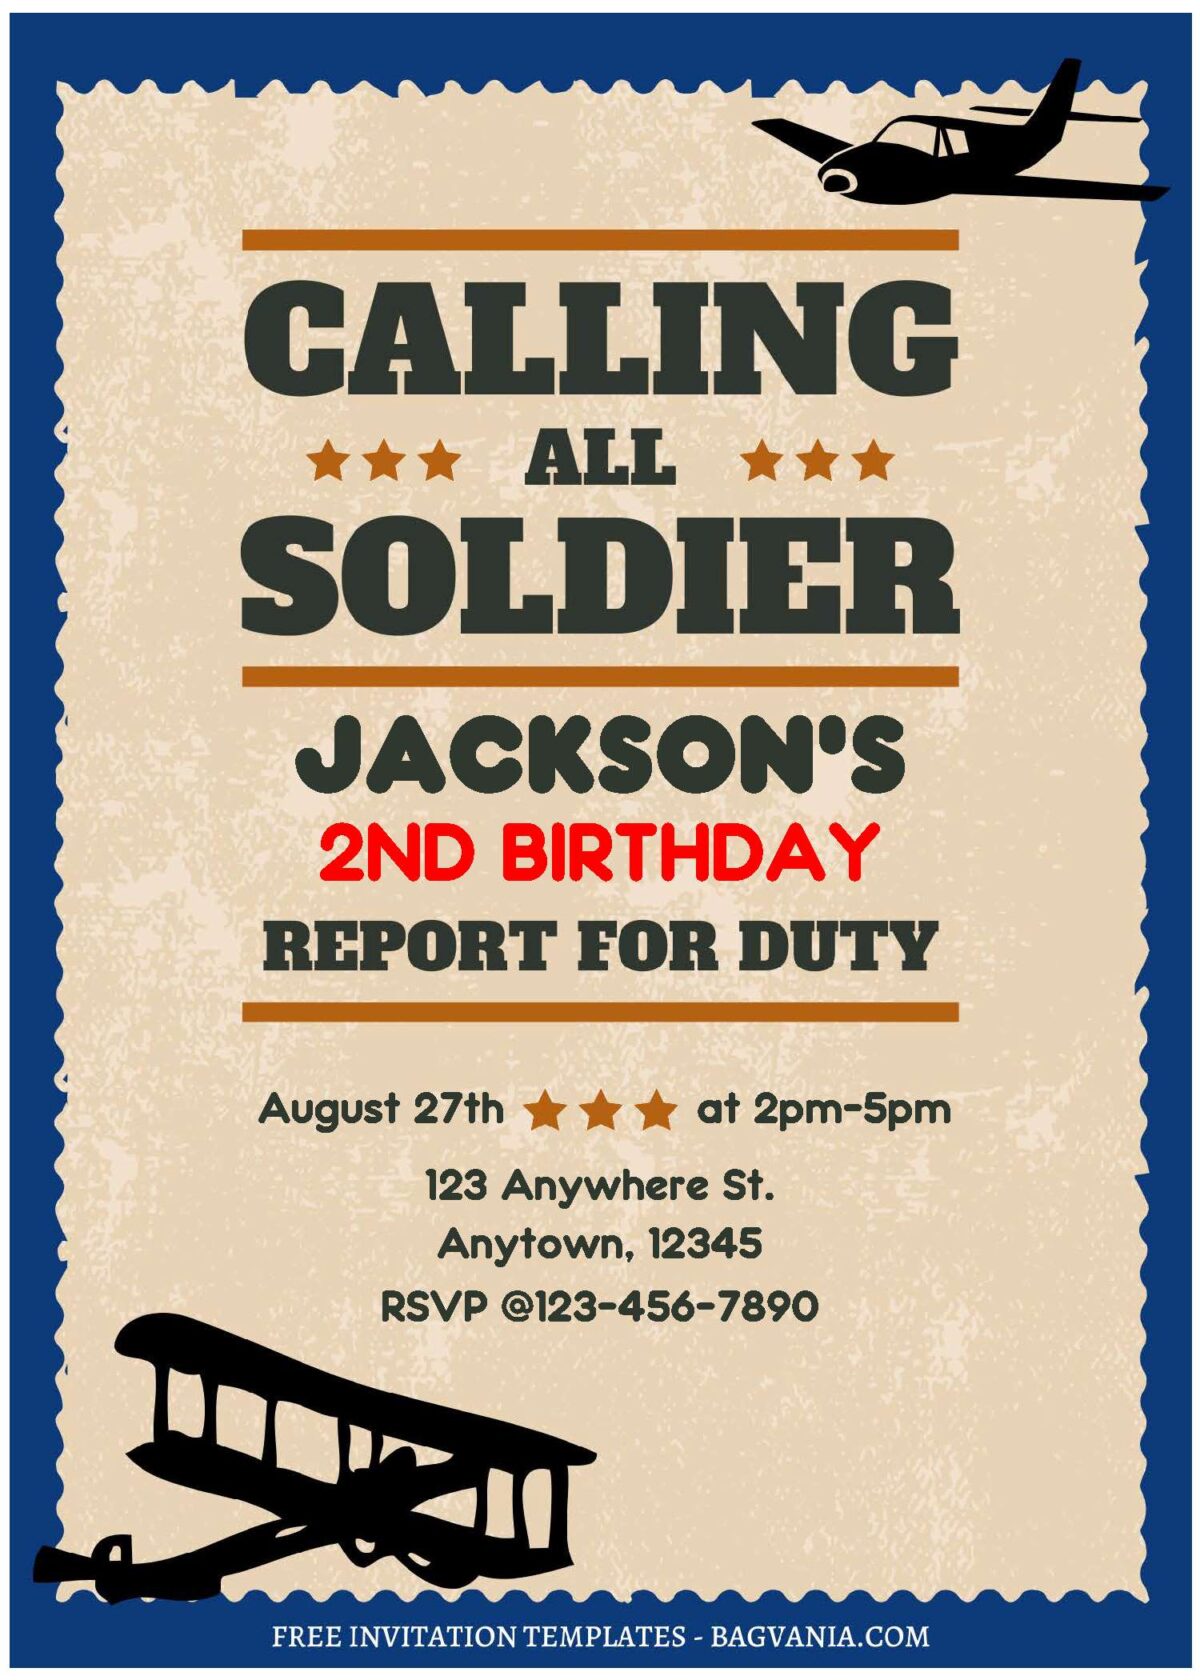 (Free Editable PDF) Calling All Soldiers Army Birthday Invitation Templates A